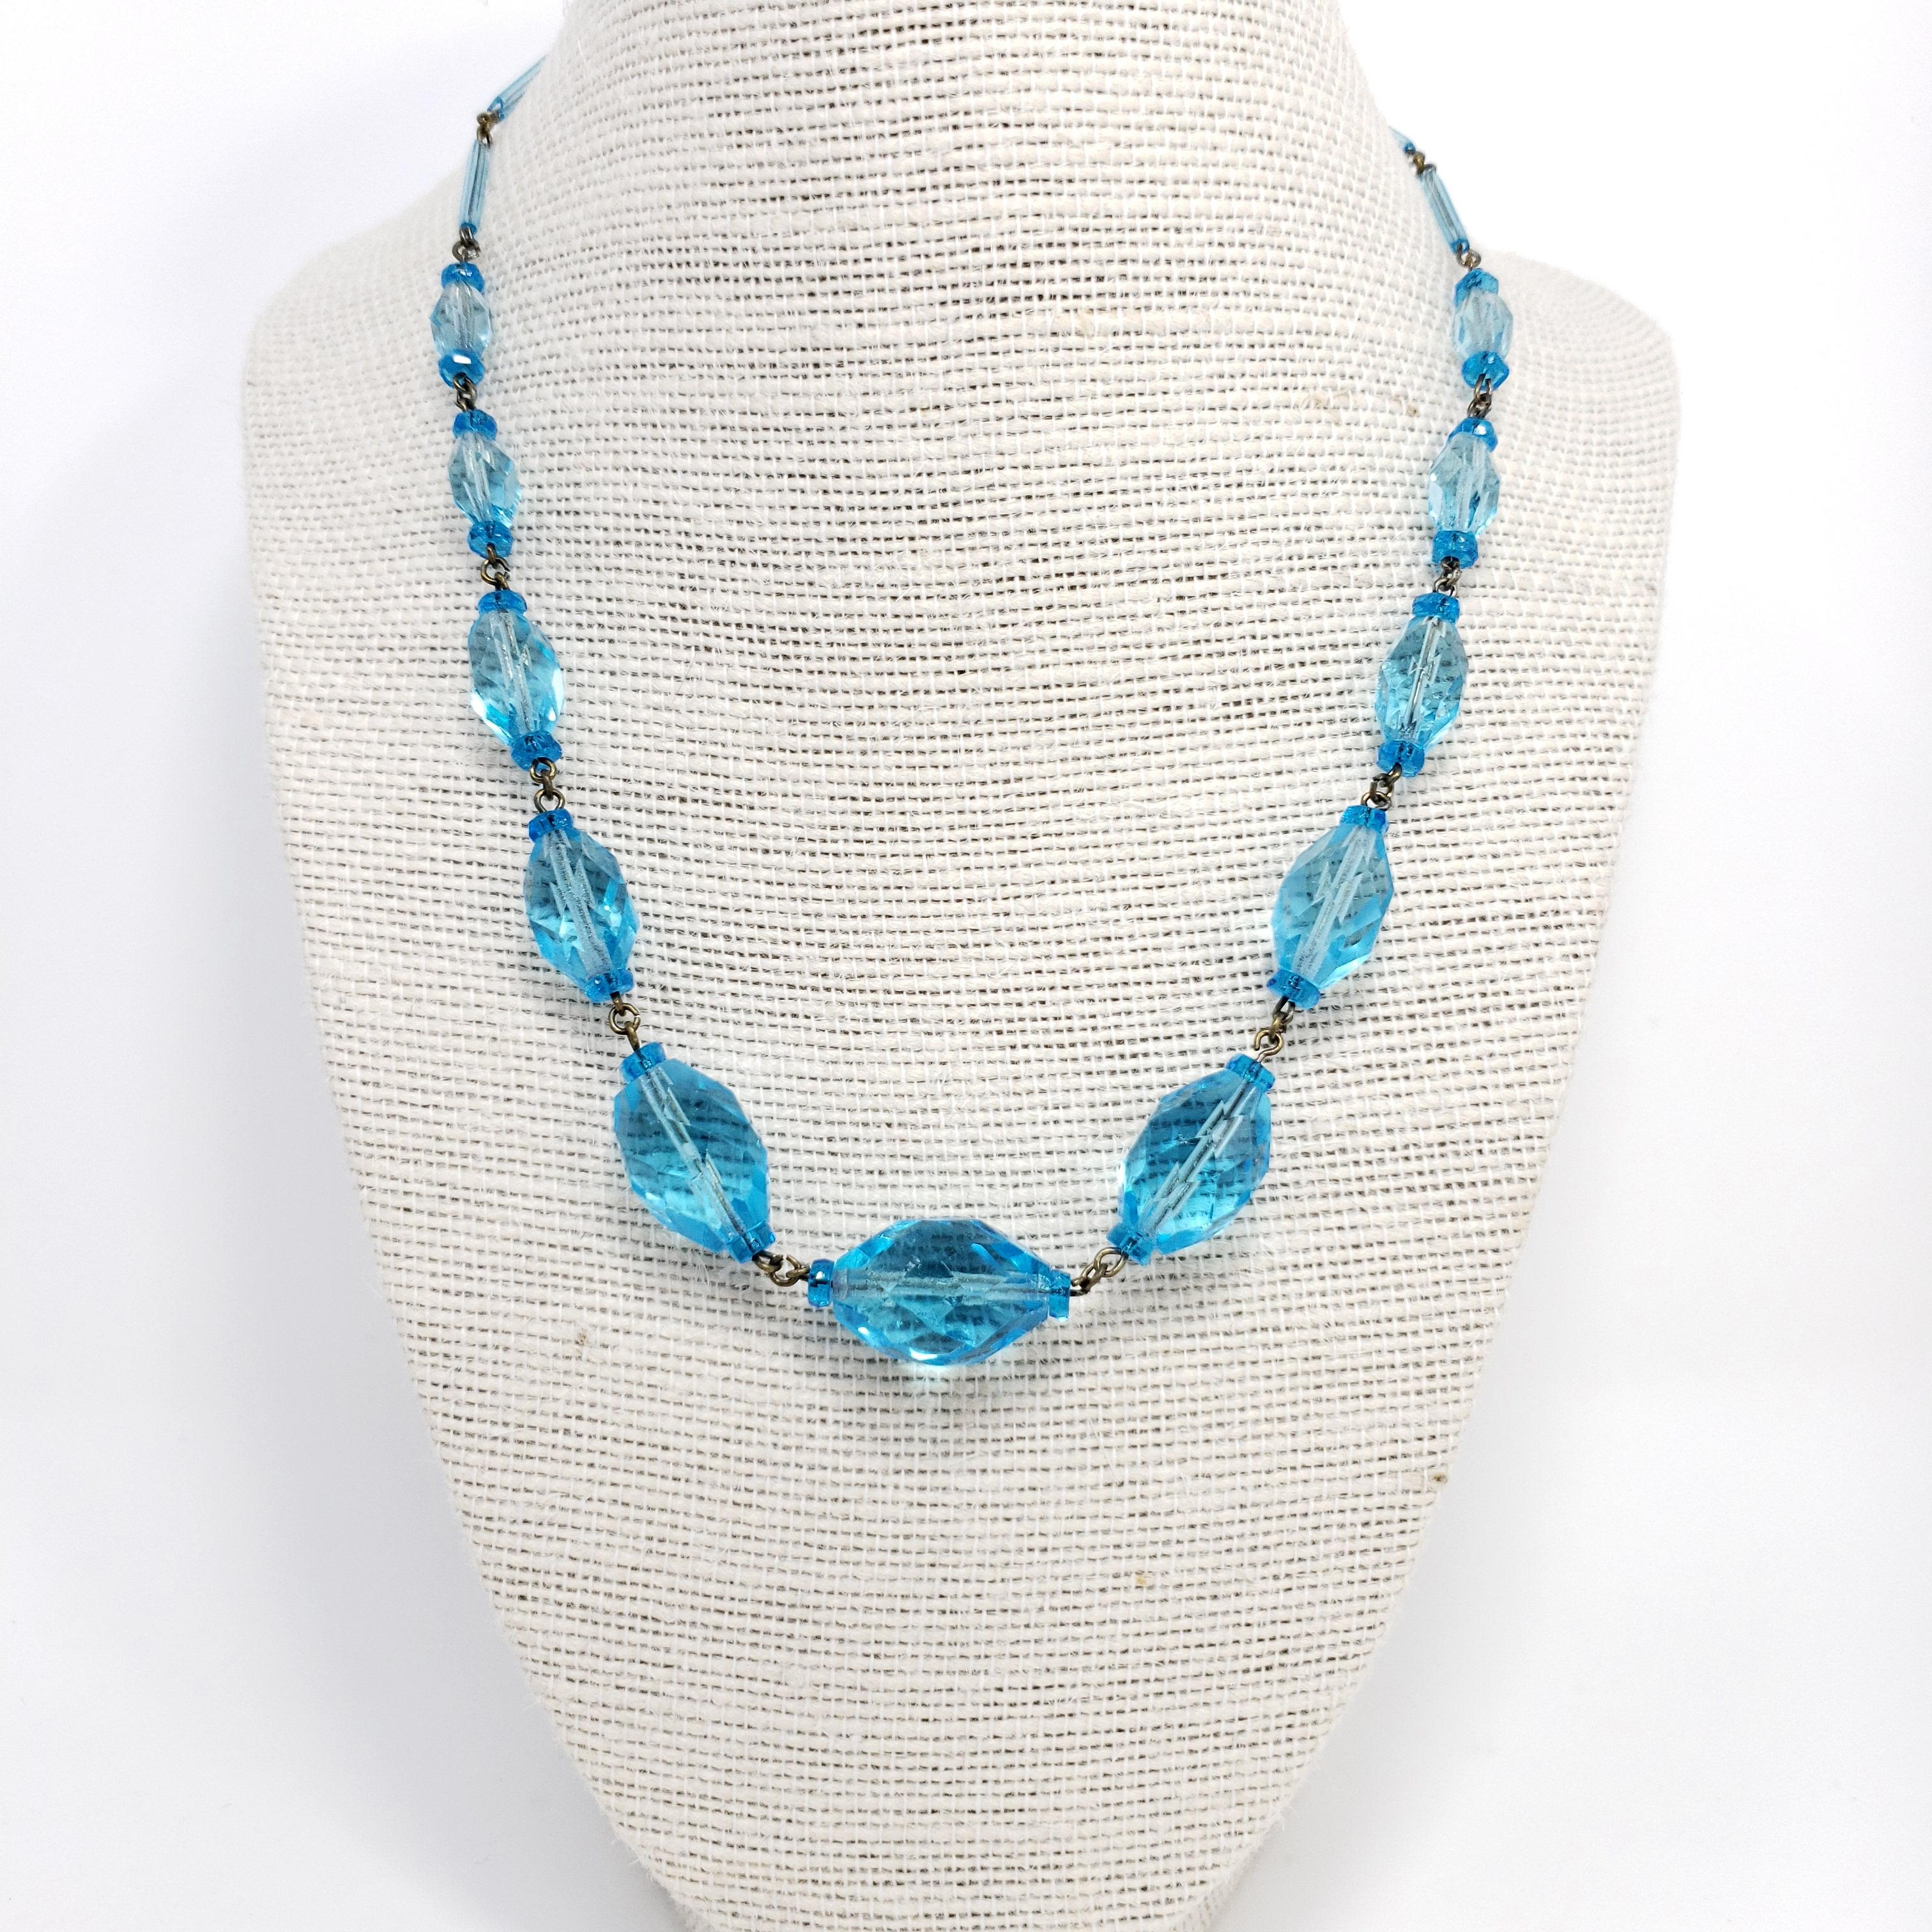 A vintage natural crystal necklace in an elegant icy blue aquamarine tone. Brass-tone chain and spring-ring clasp closure.

